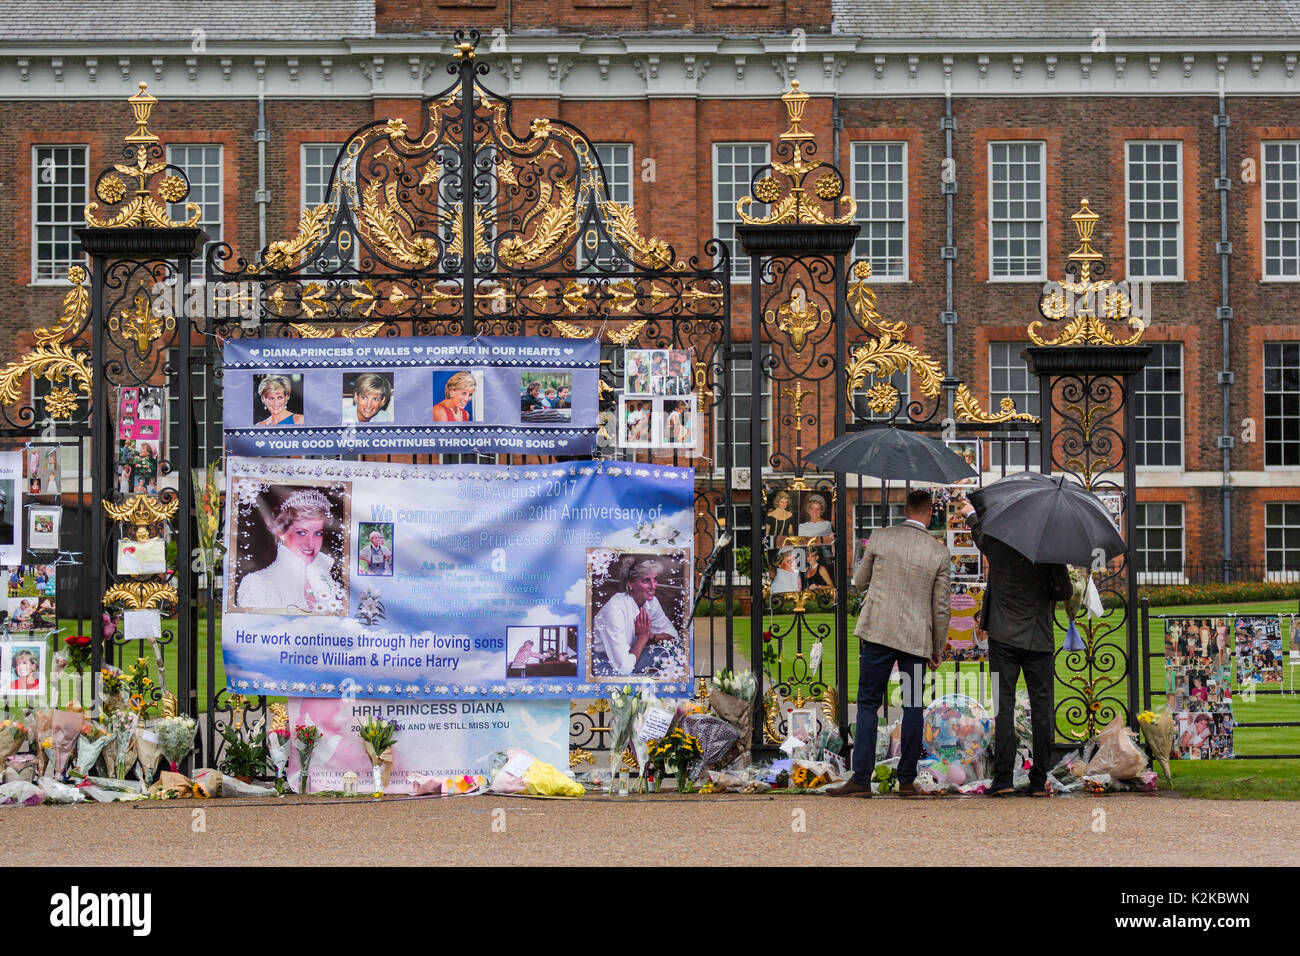 London, UK. 30th Aug, 2017. HRH Prince Harry points out childhood photographs of himself and the Duke of Cambridge as children, while he and Princes William view tributes left for their late mother, Princess Diana on the eve of the 20th Anniversary of her death. Credit: amanda rose/Alamy Live News Stock Photo